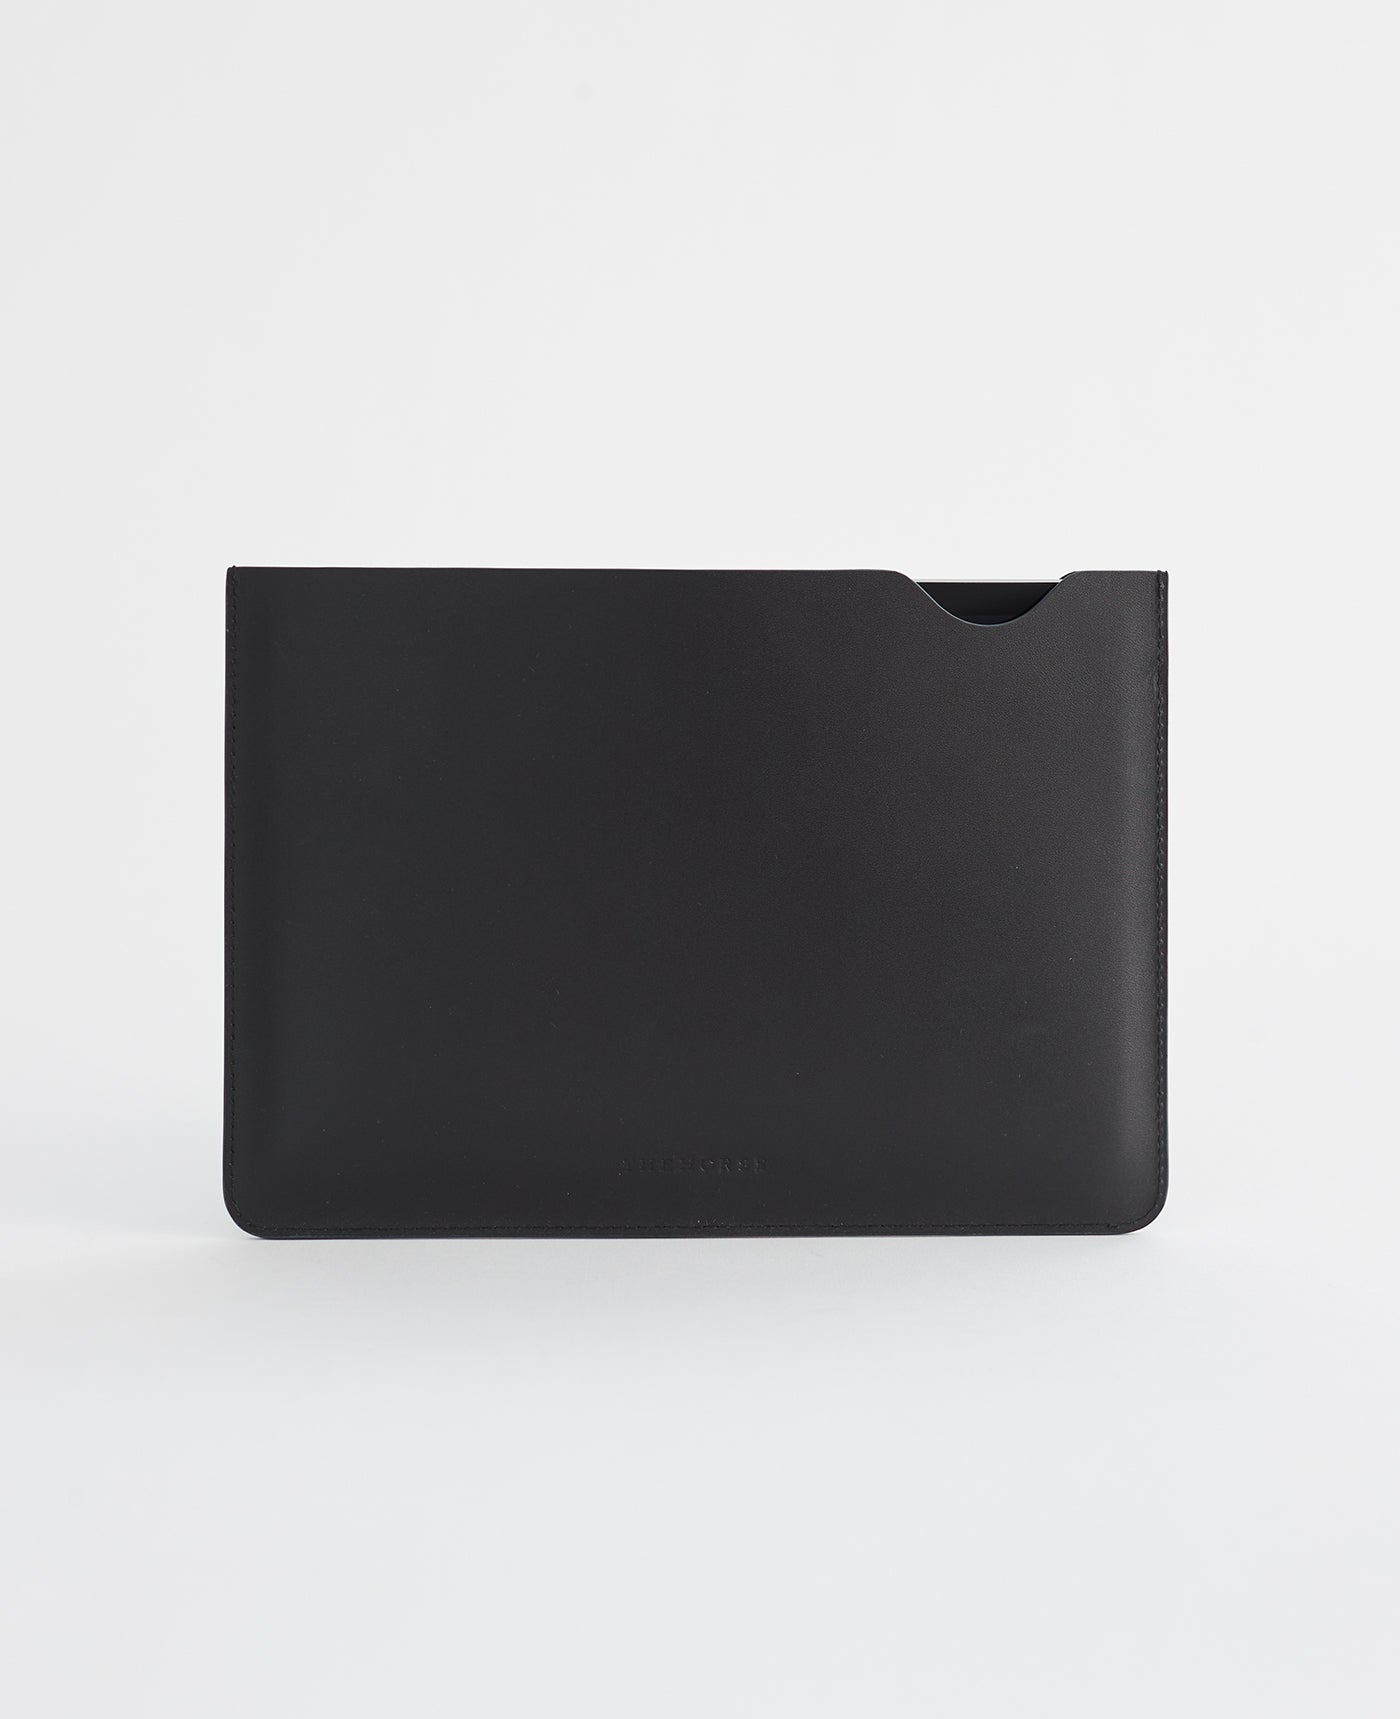 iPad Air Leather Sleeve in Black by The Horse®